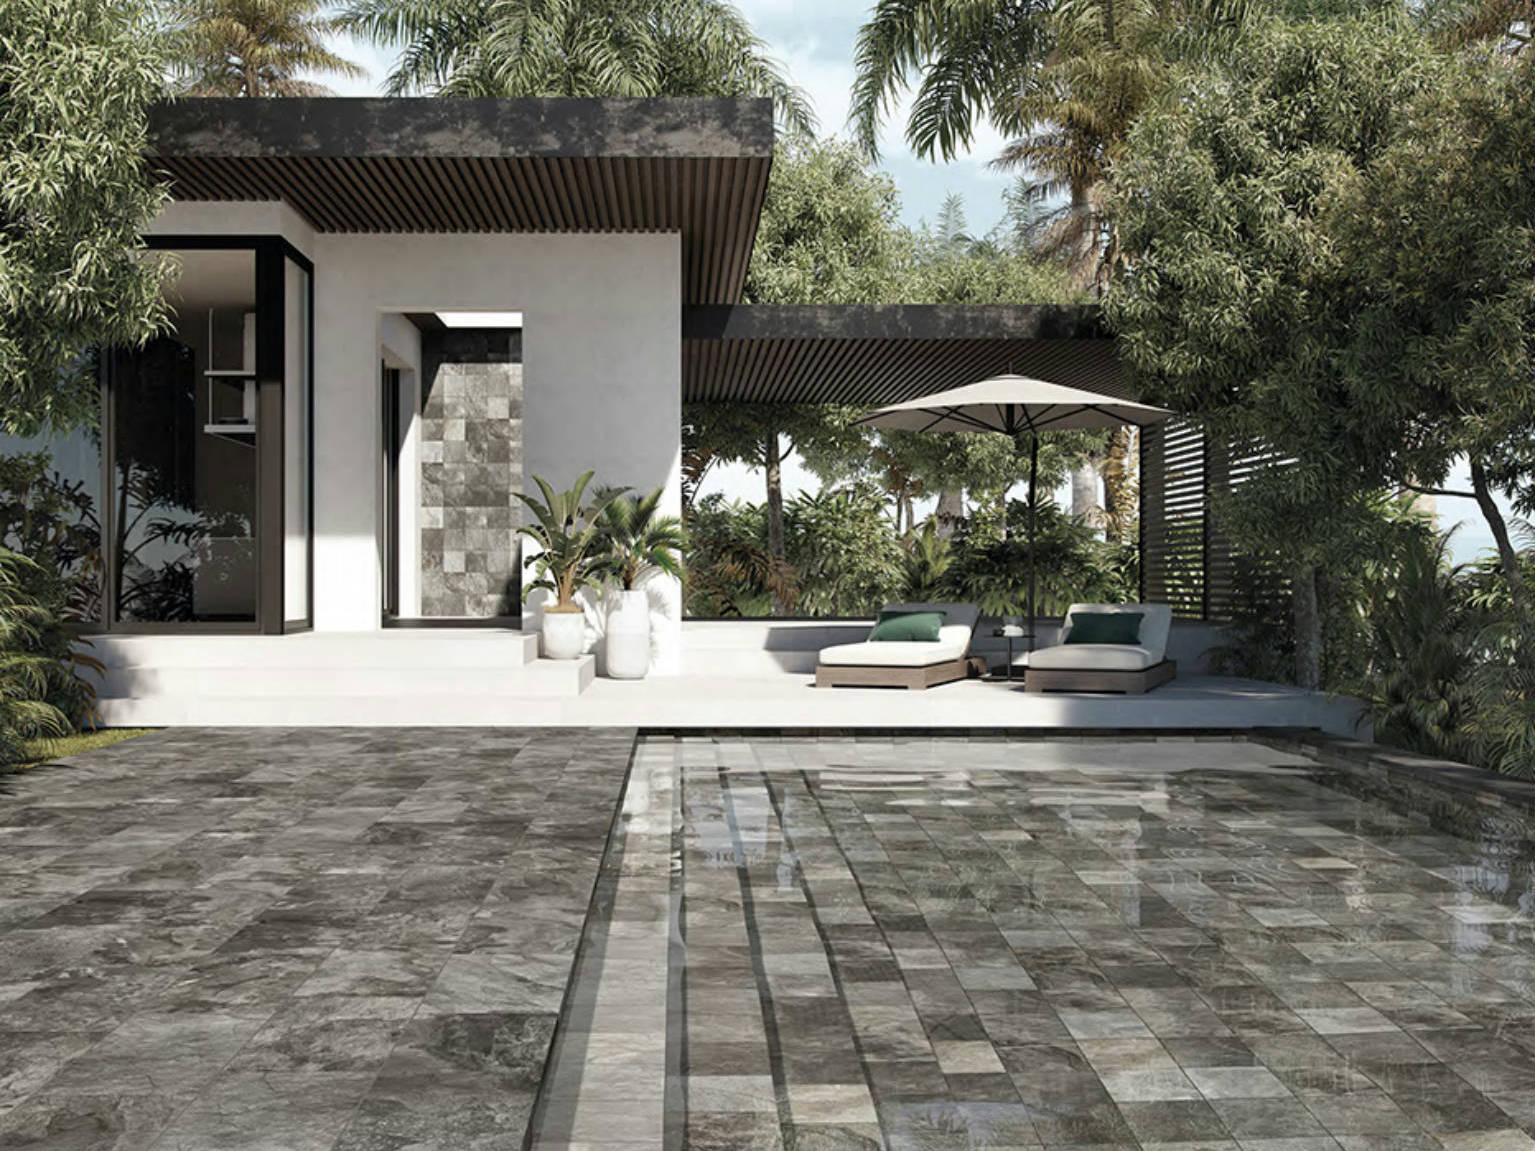 Nepal Slate Pokhara Pizzara 12x24 | Qualis Ceramica | Luxury Tile and Vinyl at affordable prices